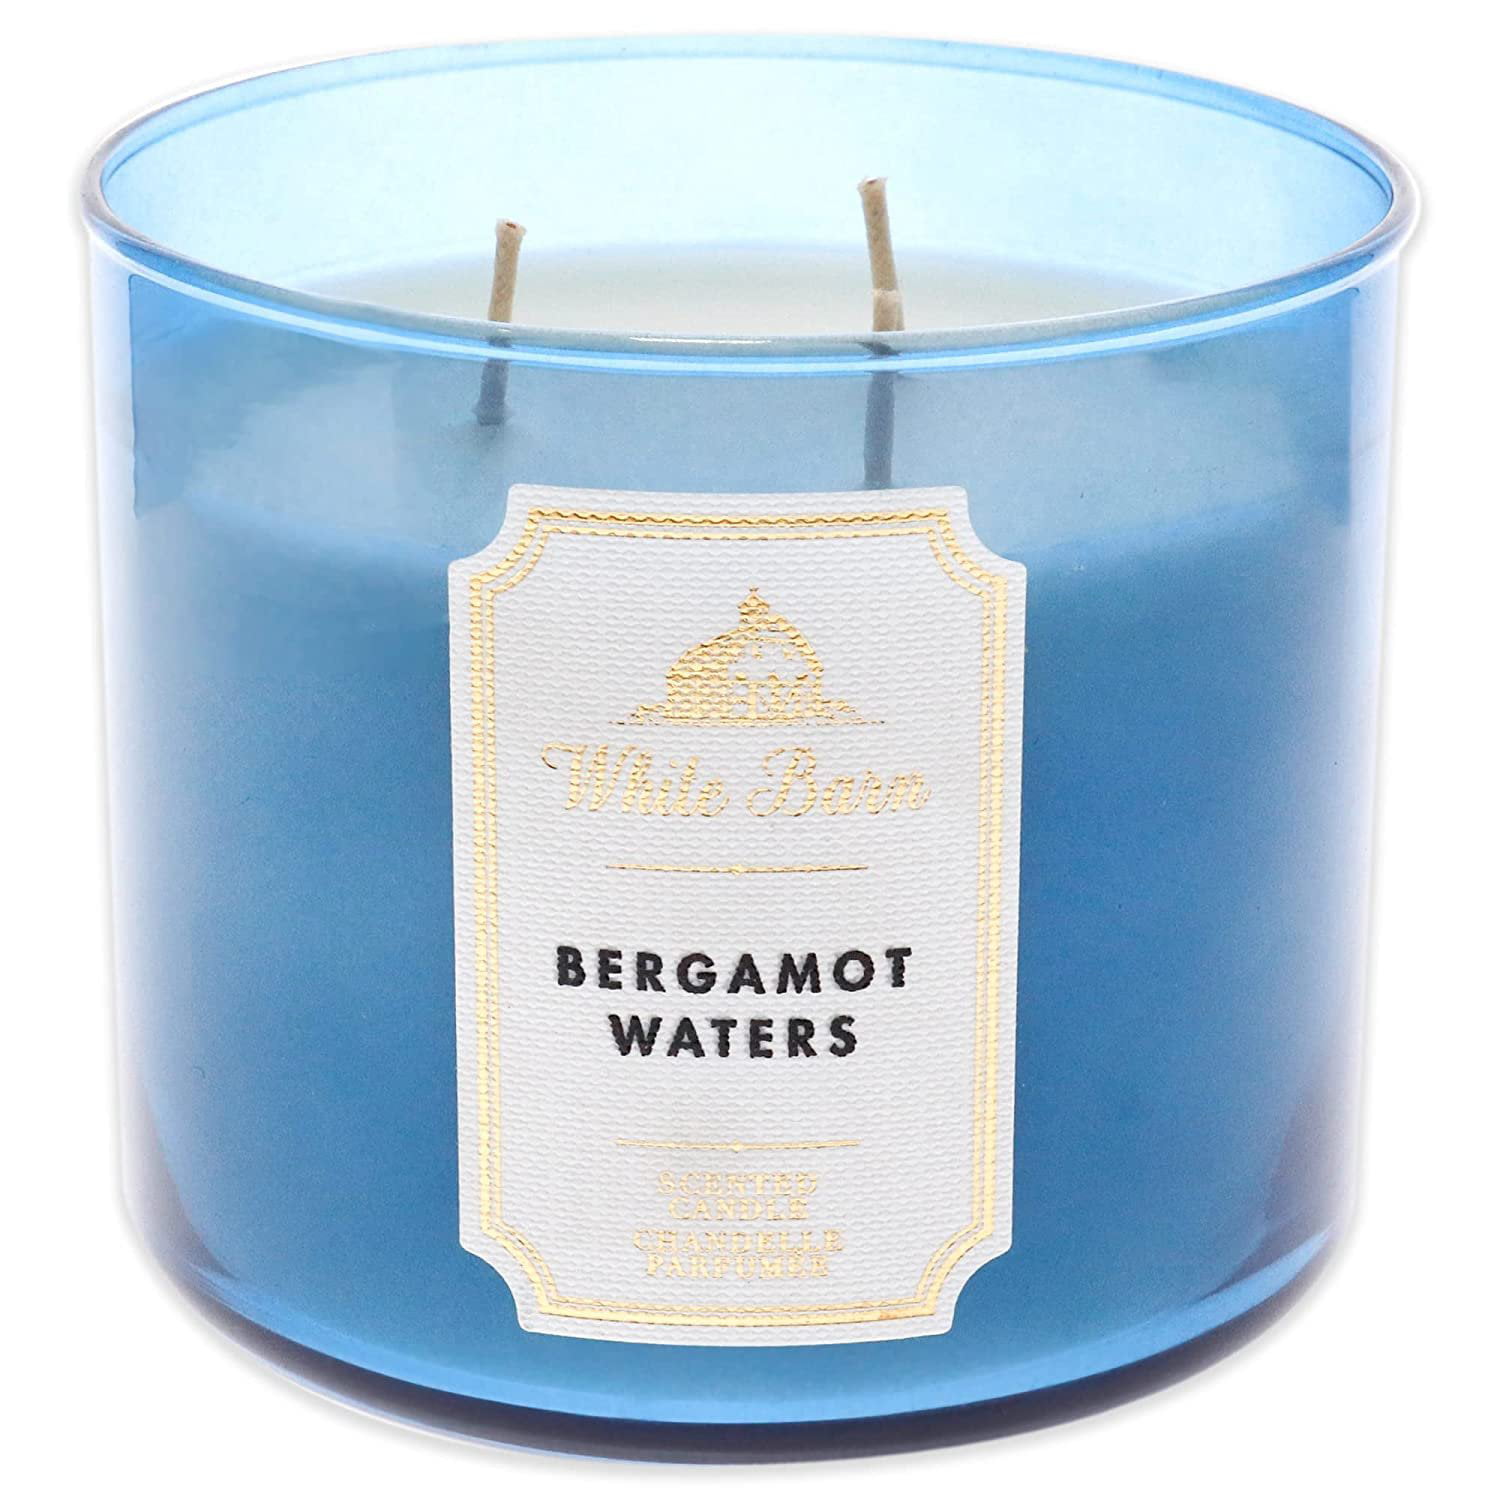 NEW BATH & BODY WORKS THE GREAT OUTDOORS SCENTED CANDLE 3 WICK 14.5OZ LARGE BLUE 